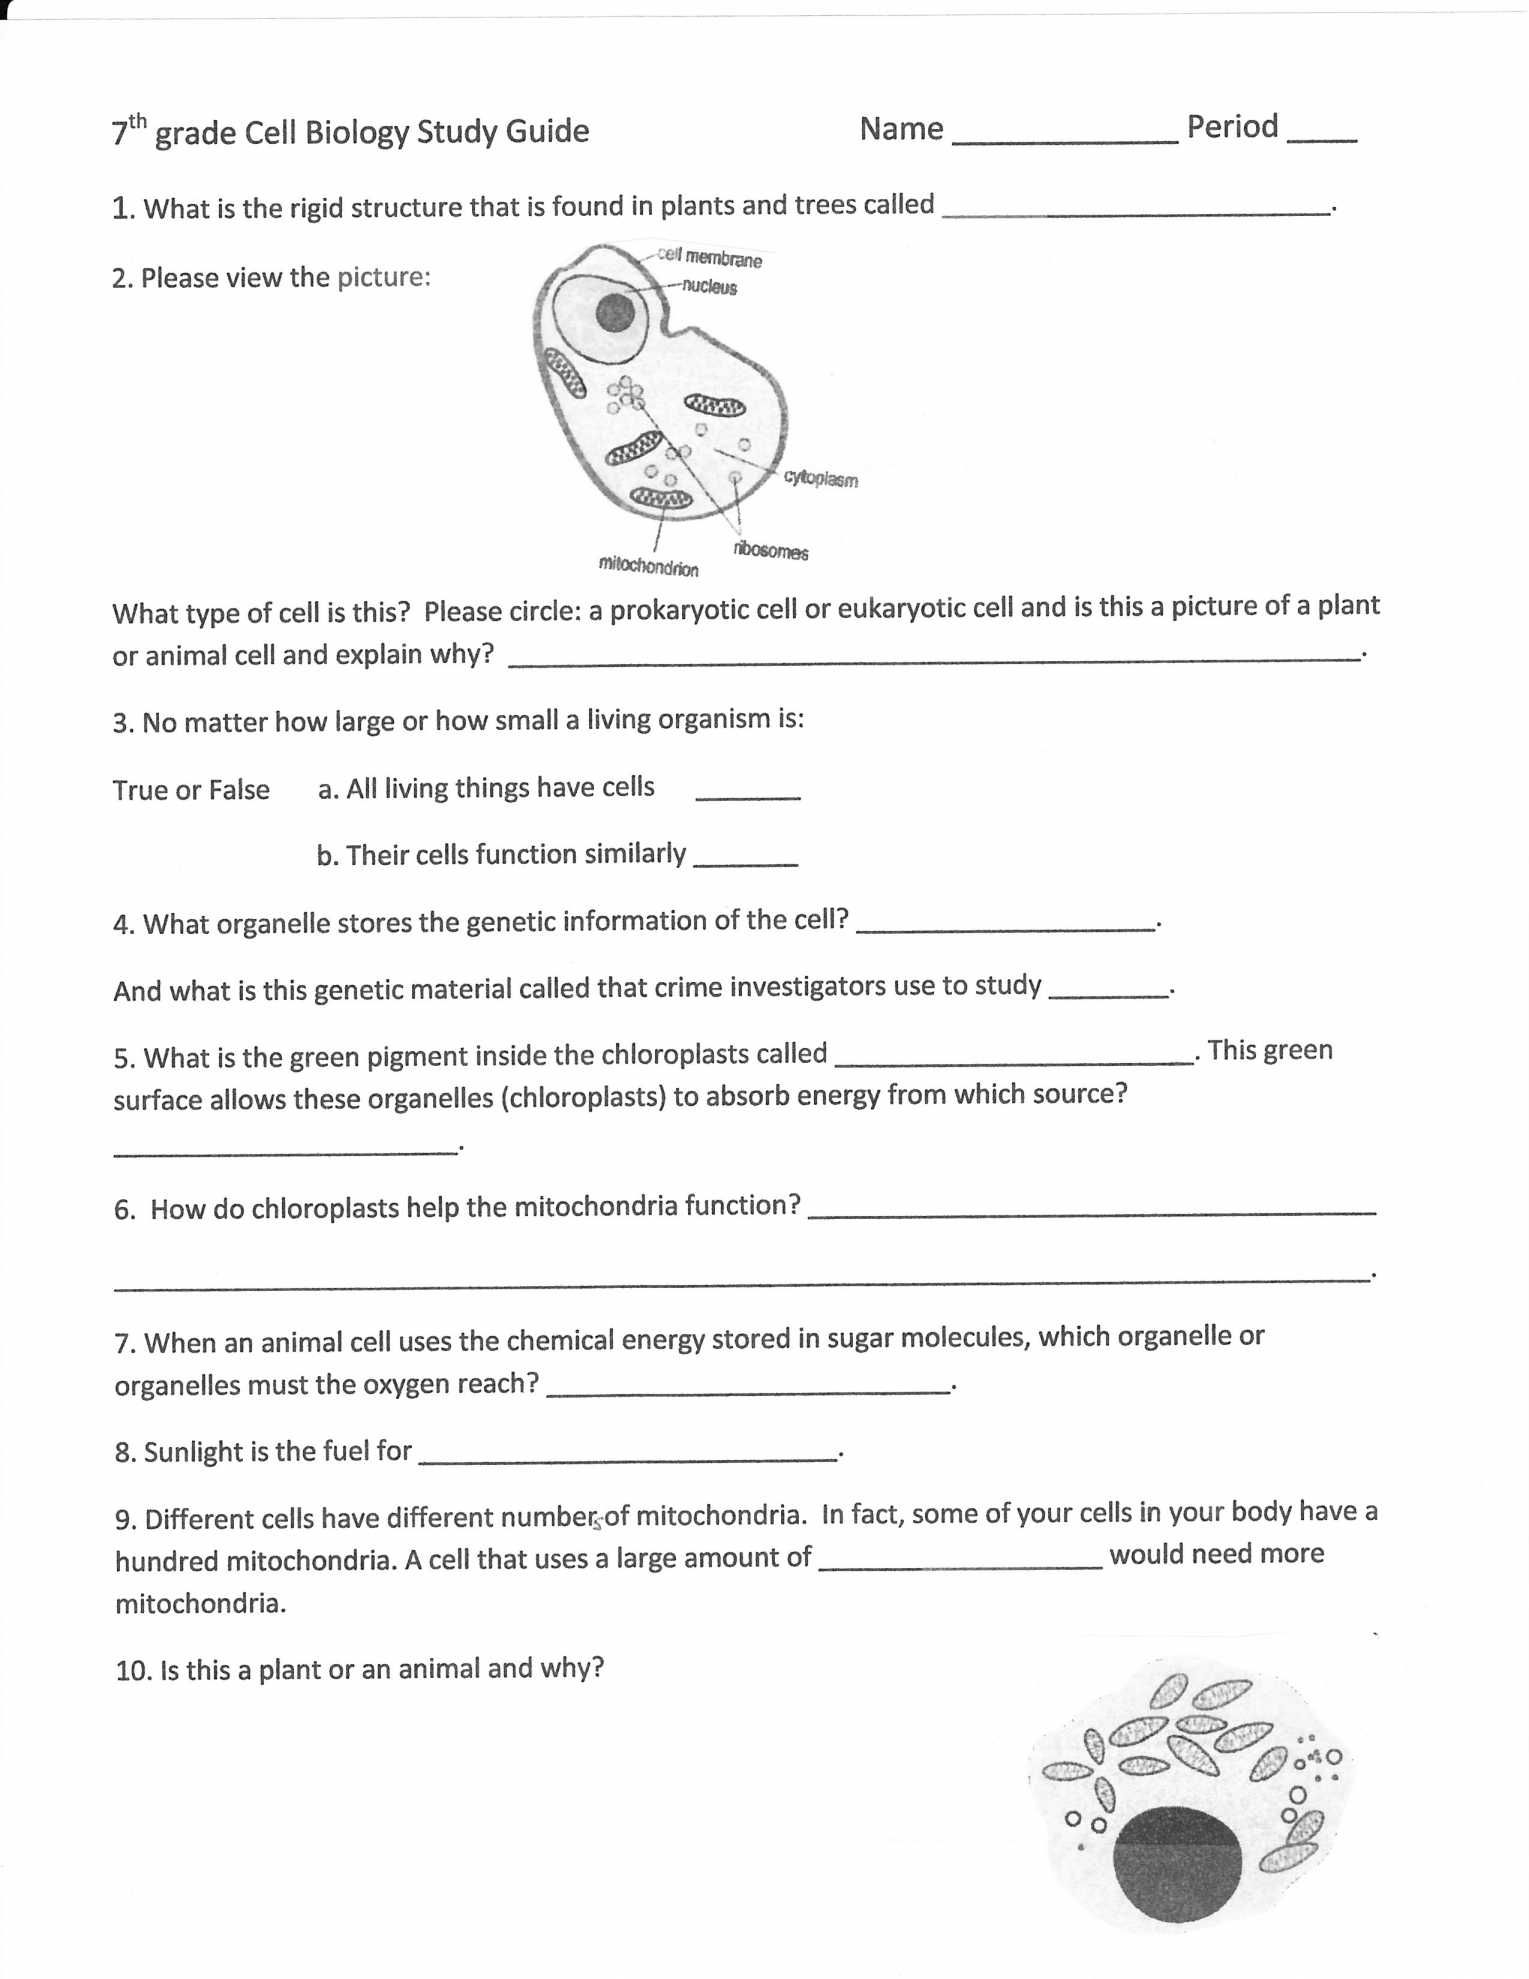 Physical Science Worksheet Conservation Of Energy 2 Answer Key